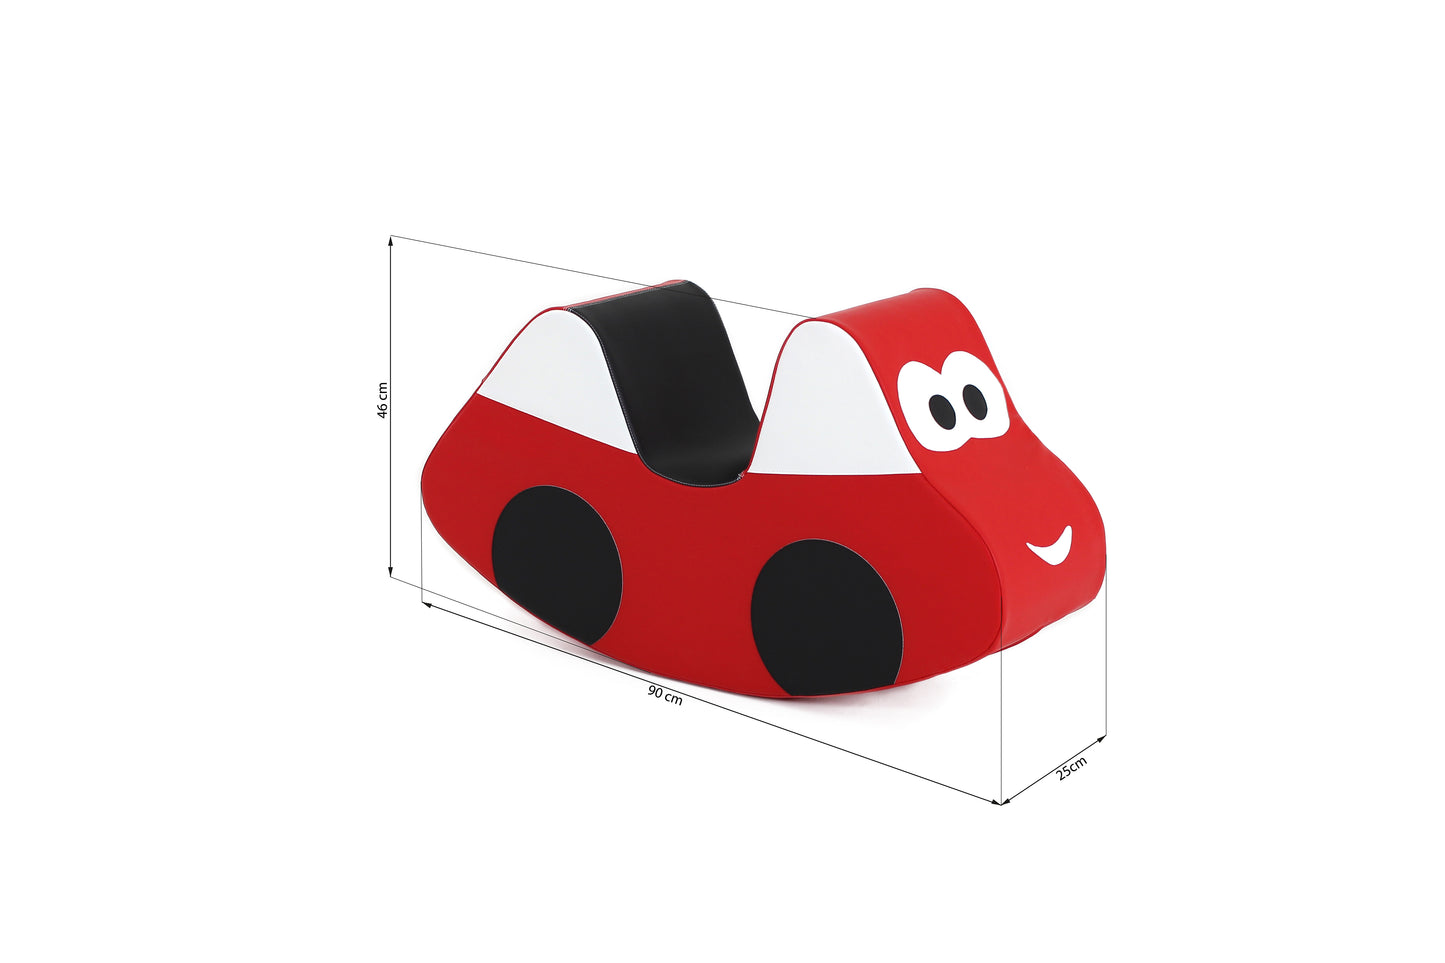 Soft Play Ride on Toy Car (#4, red)